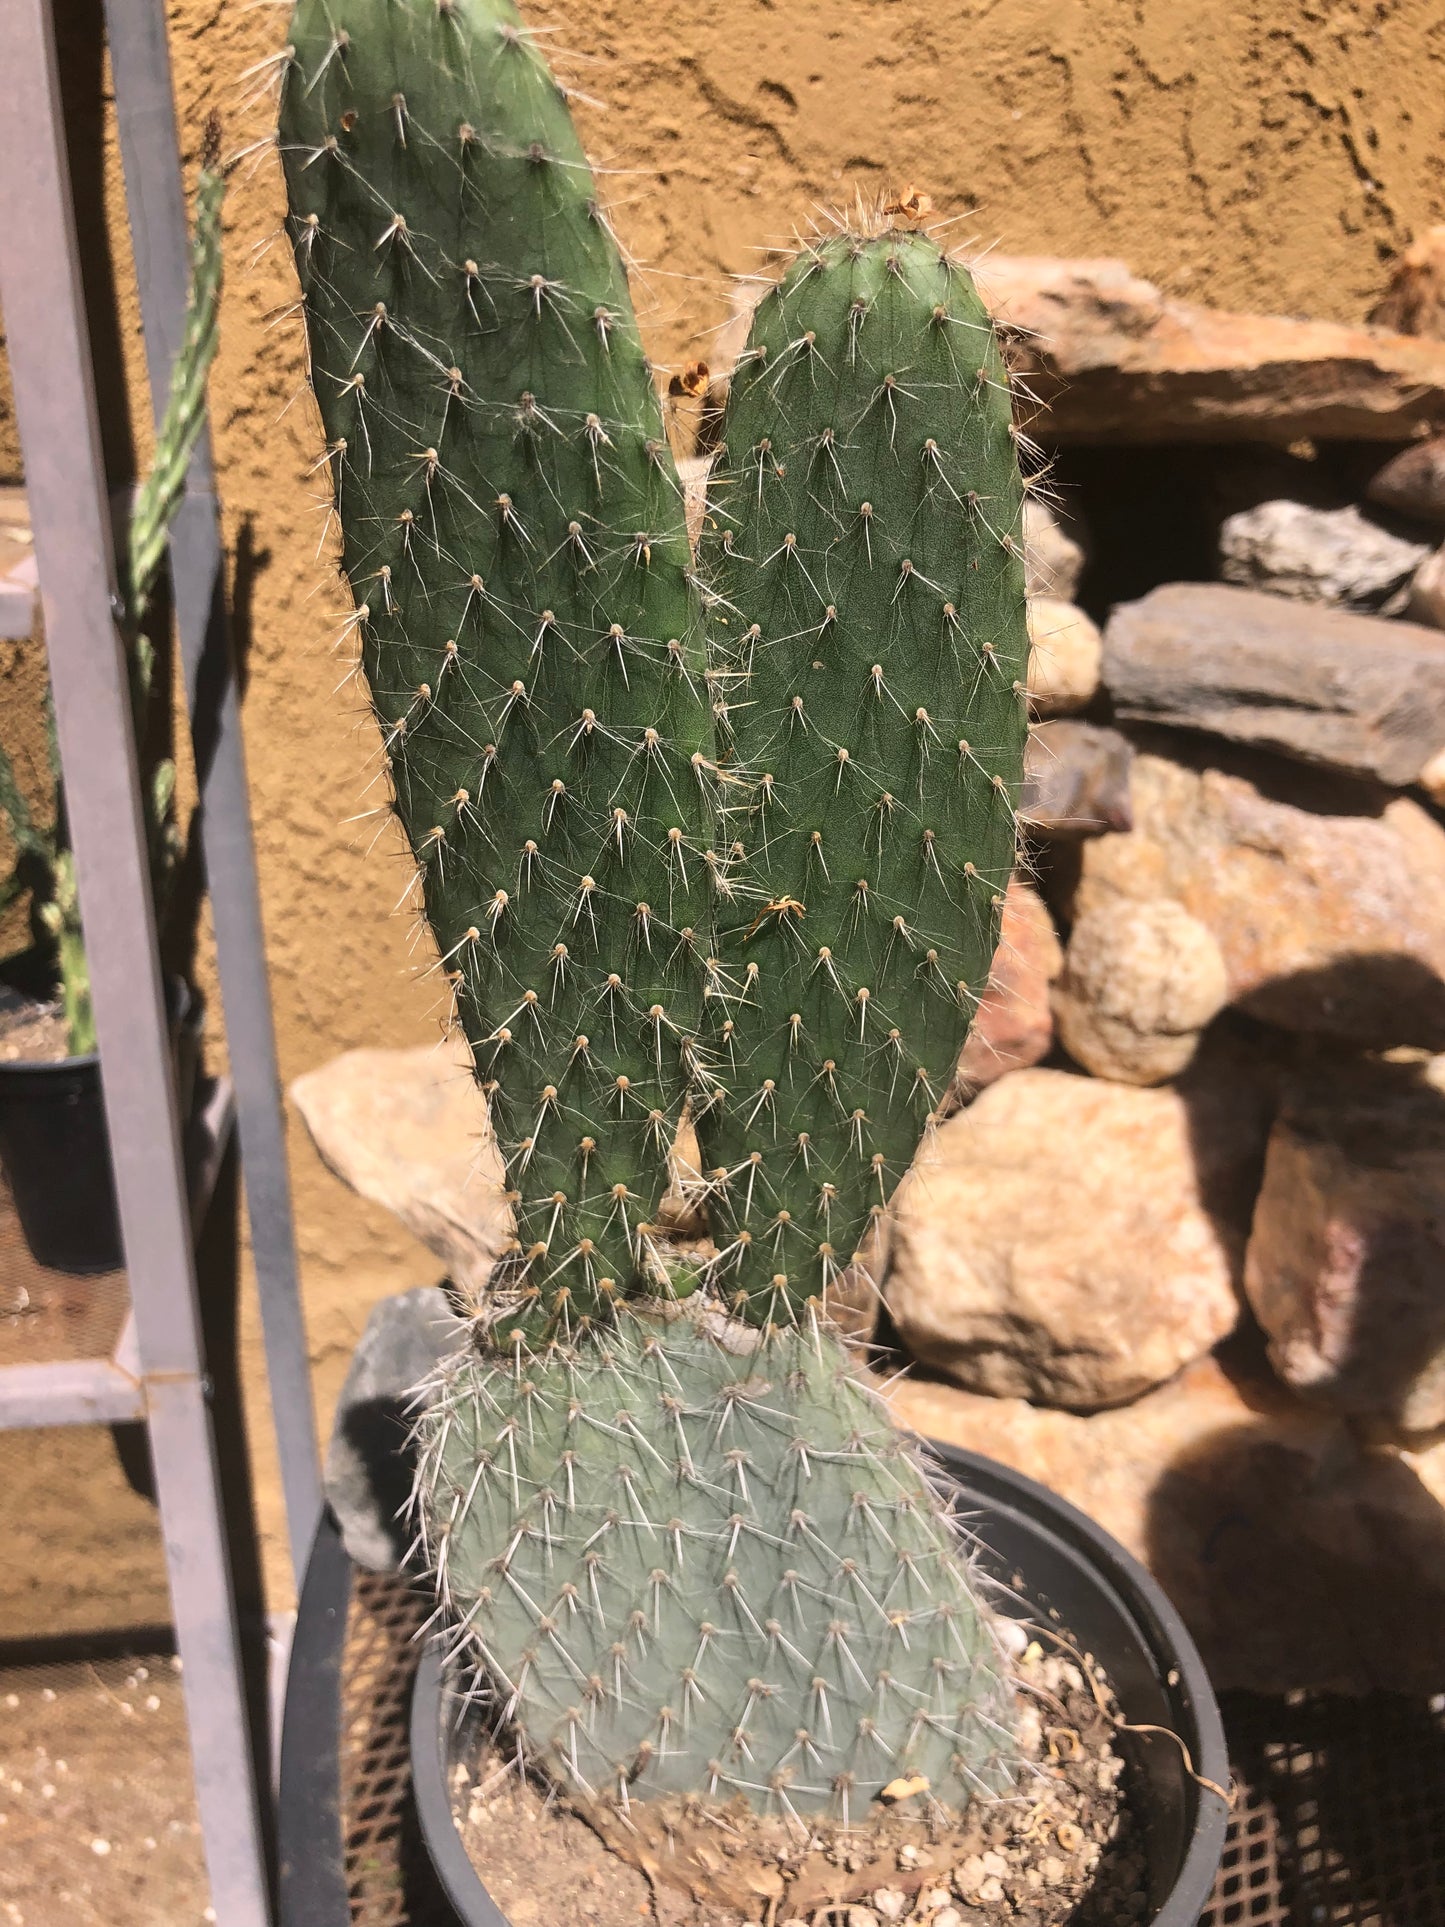 Opuntia engelmannii "White Thorned Prickly Pear" 13"Tall 5"Wide #13R